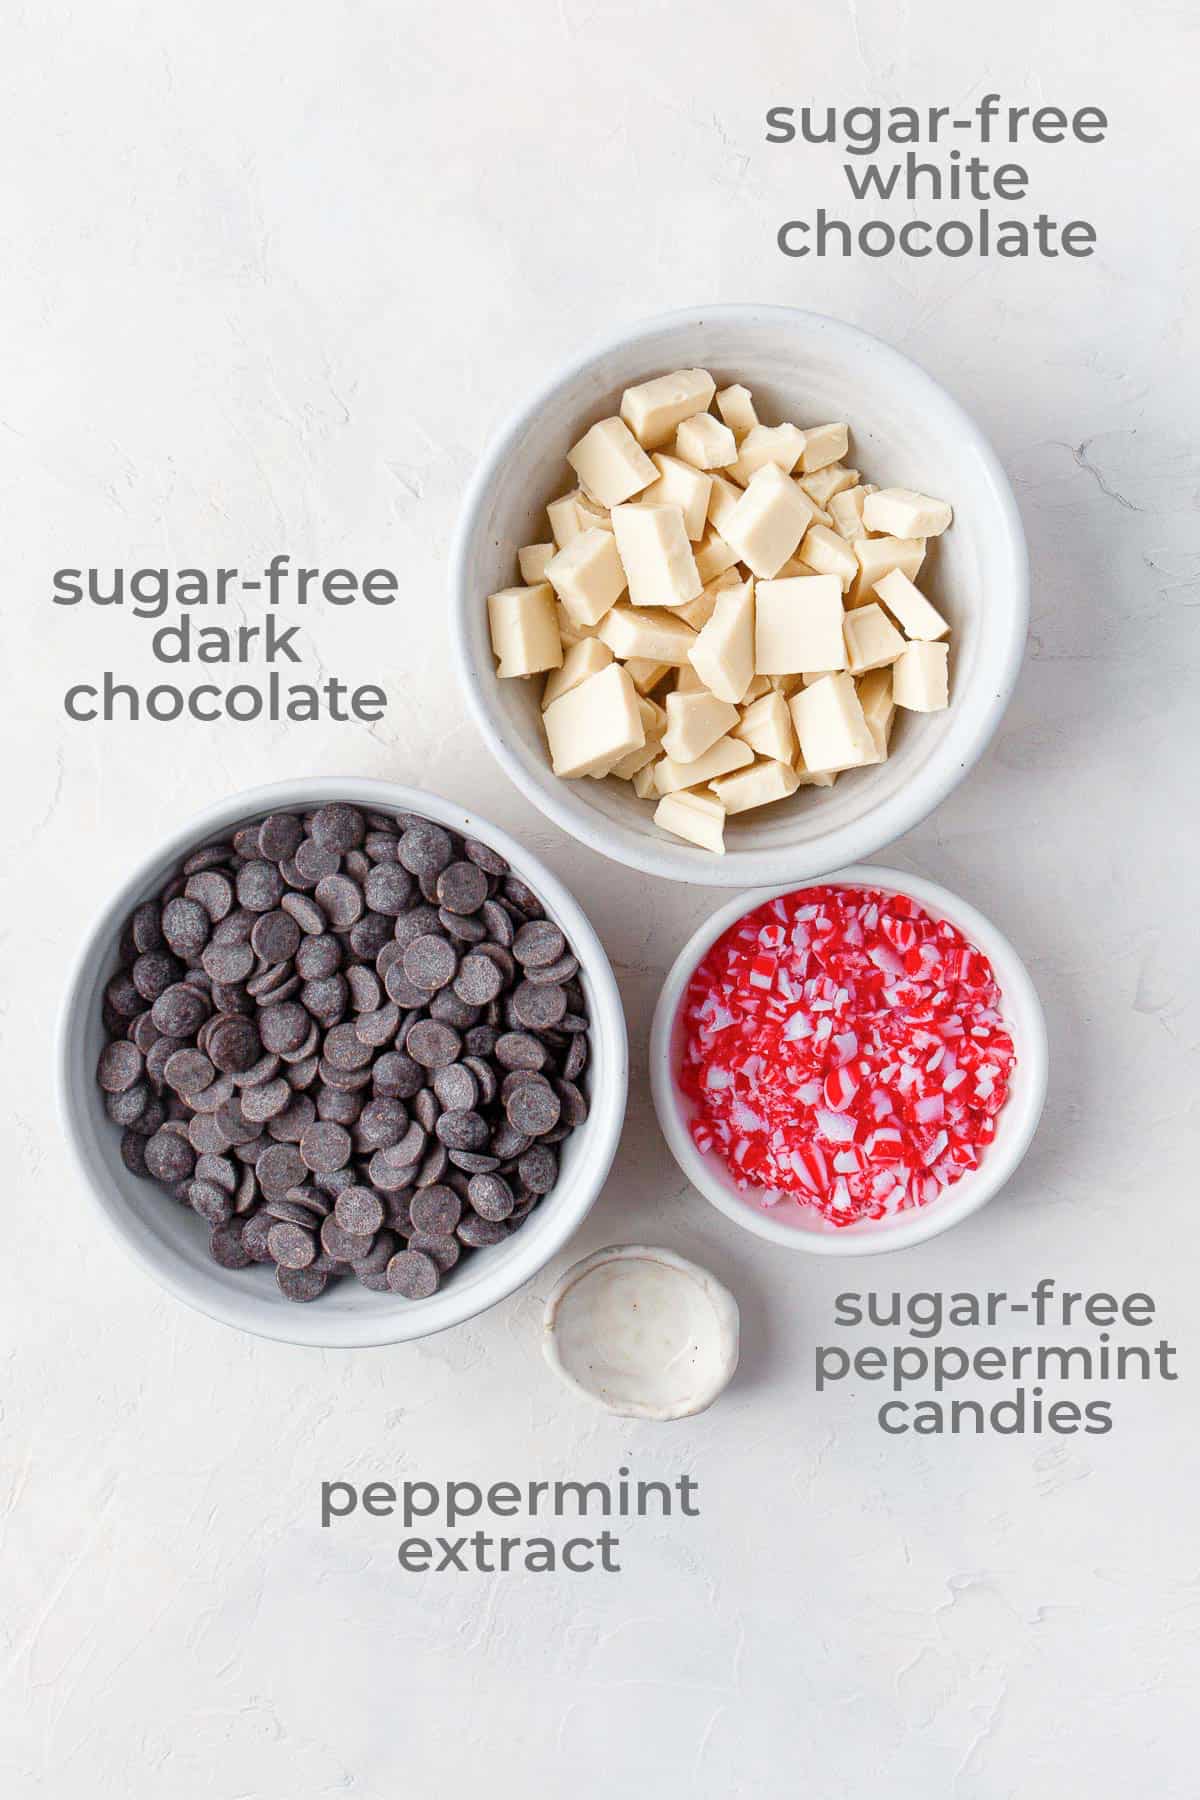 Ingredients laid out in individual bowls to make keto peppermint bark - white chocolate, dark chocolate, peppermint candies and peppermint extract.